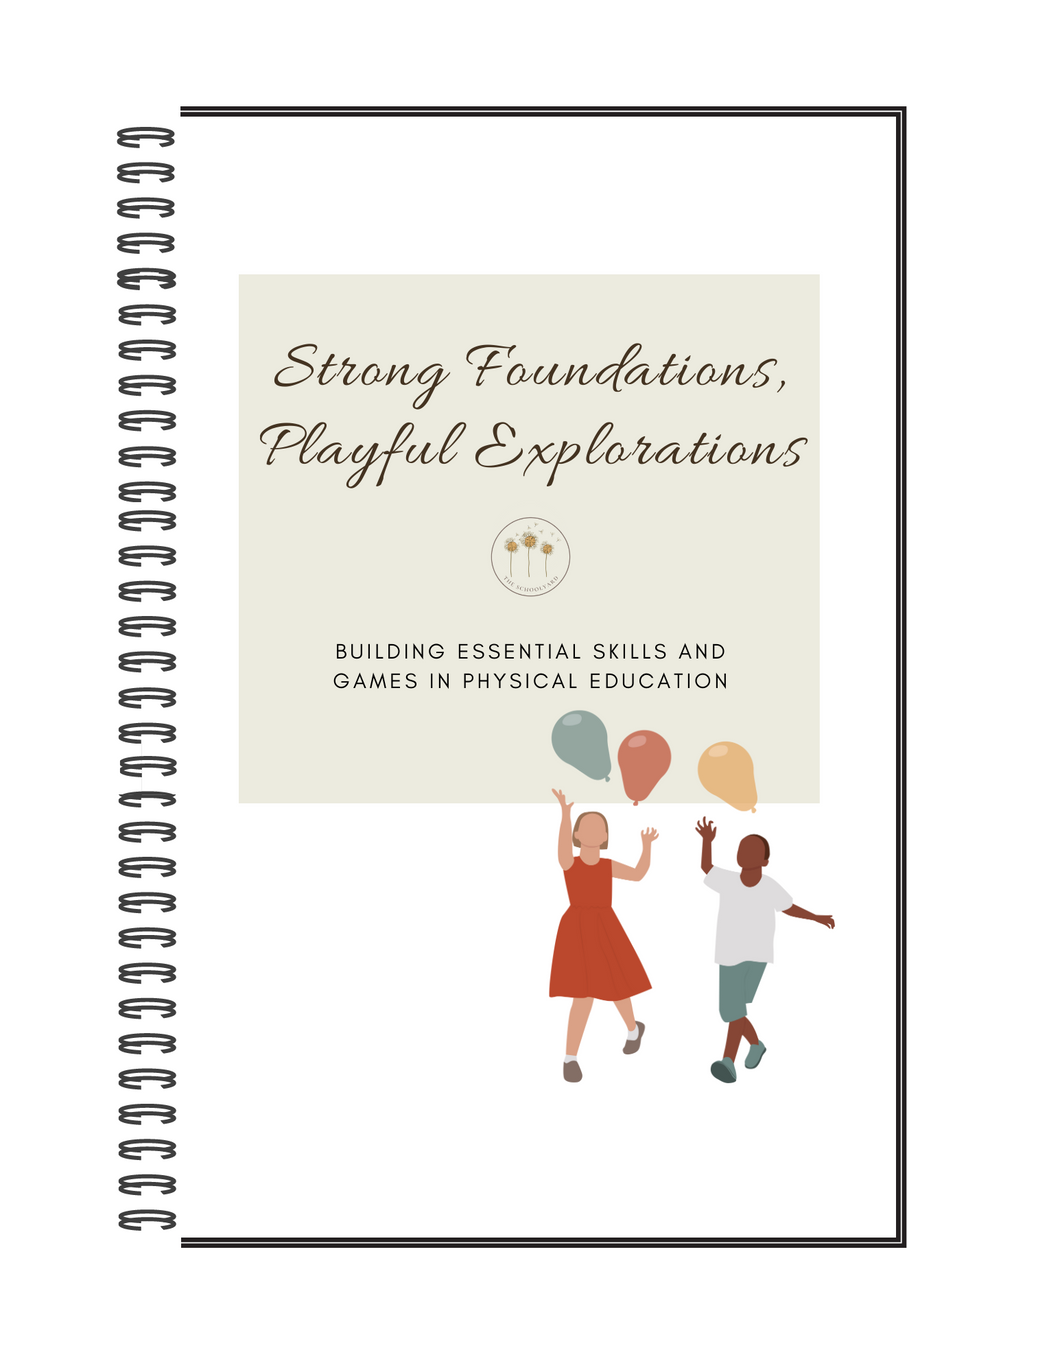 Strong Foundations, Playful Explorations: Building Essential Skills and Games in Physical Education